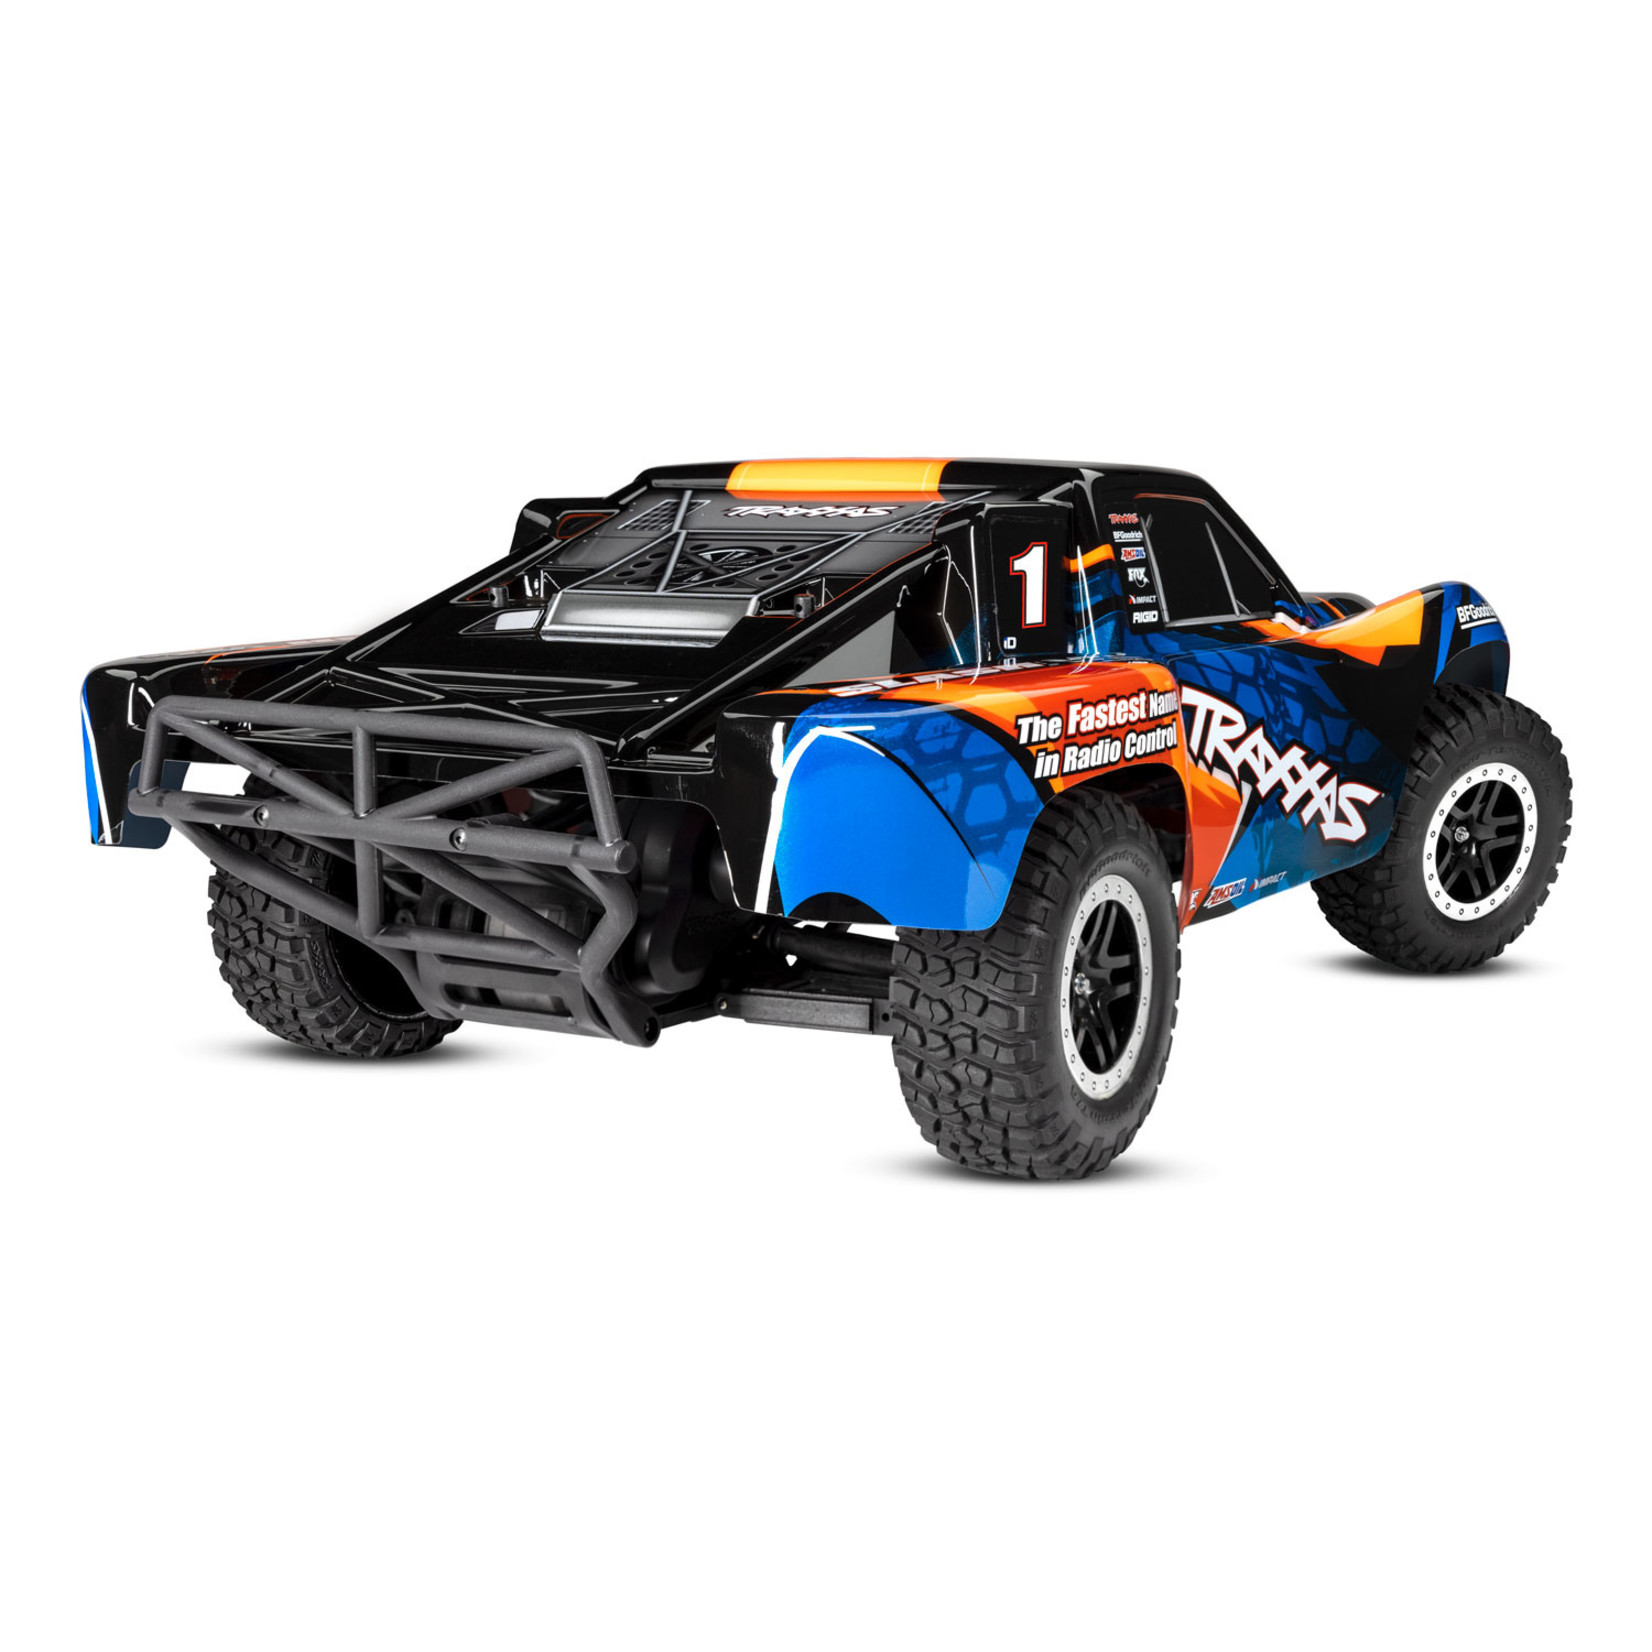 Slash® VXL: 1/10 Scale 2WD Brushless Short Course Racing Truck